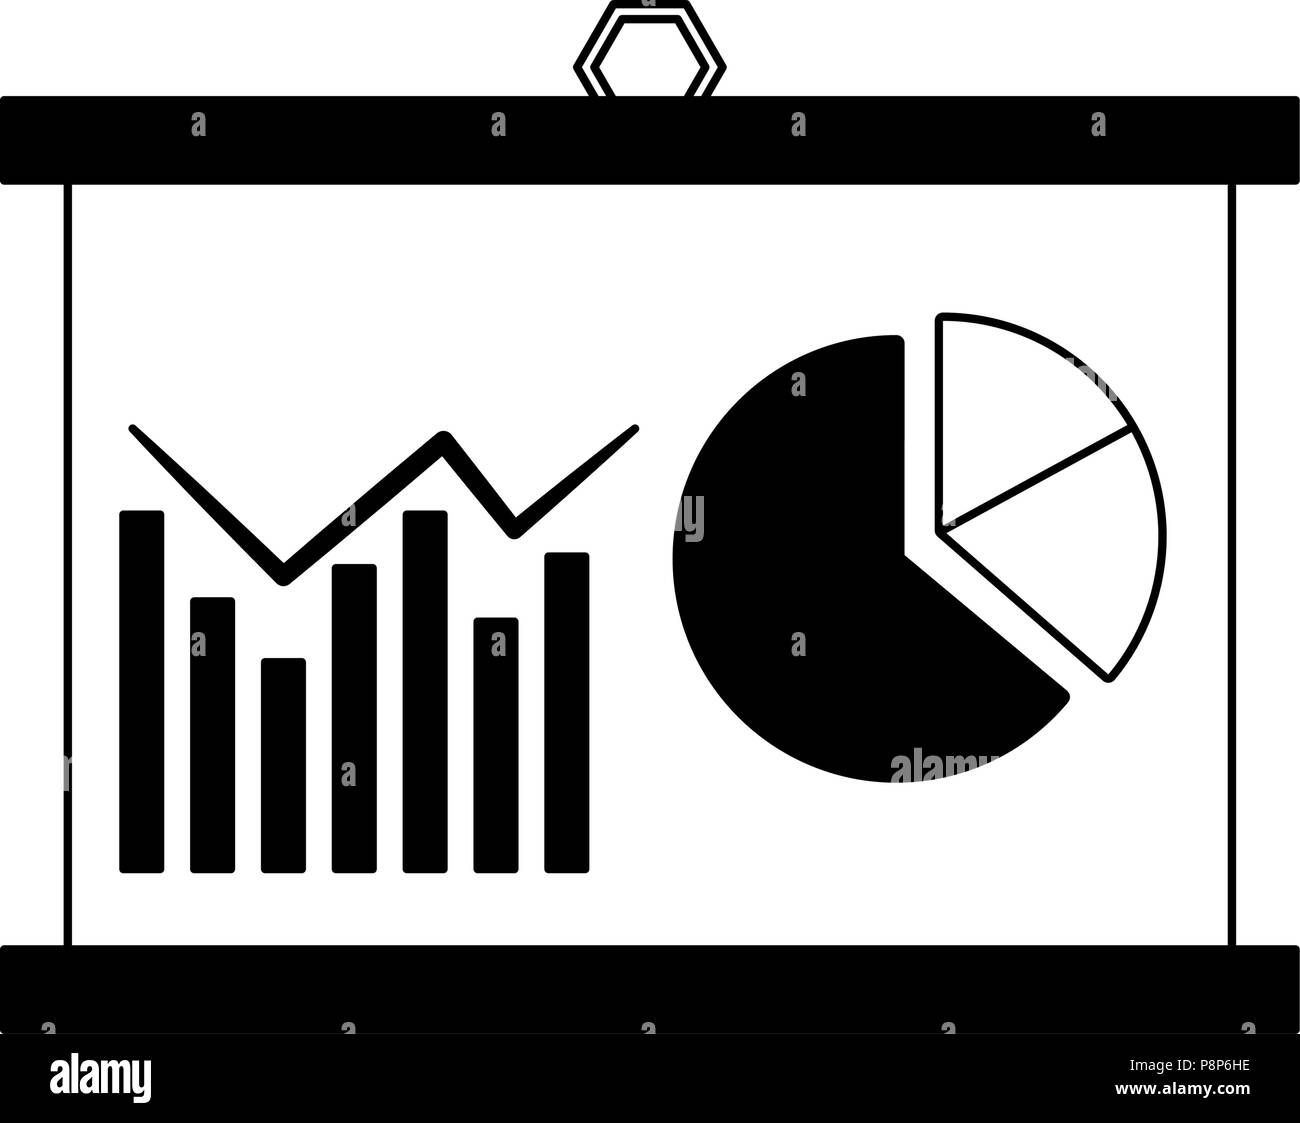 Statistics on whiteboard black and white colors Stock Vector